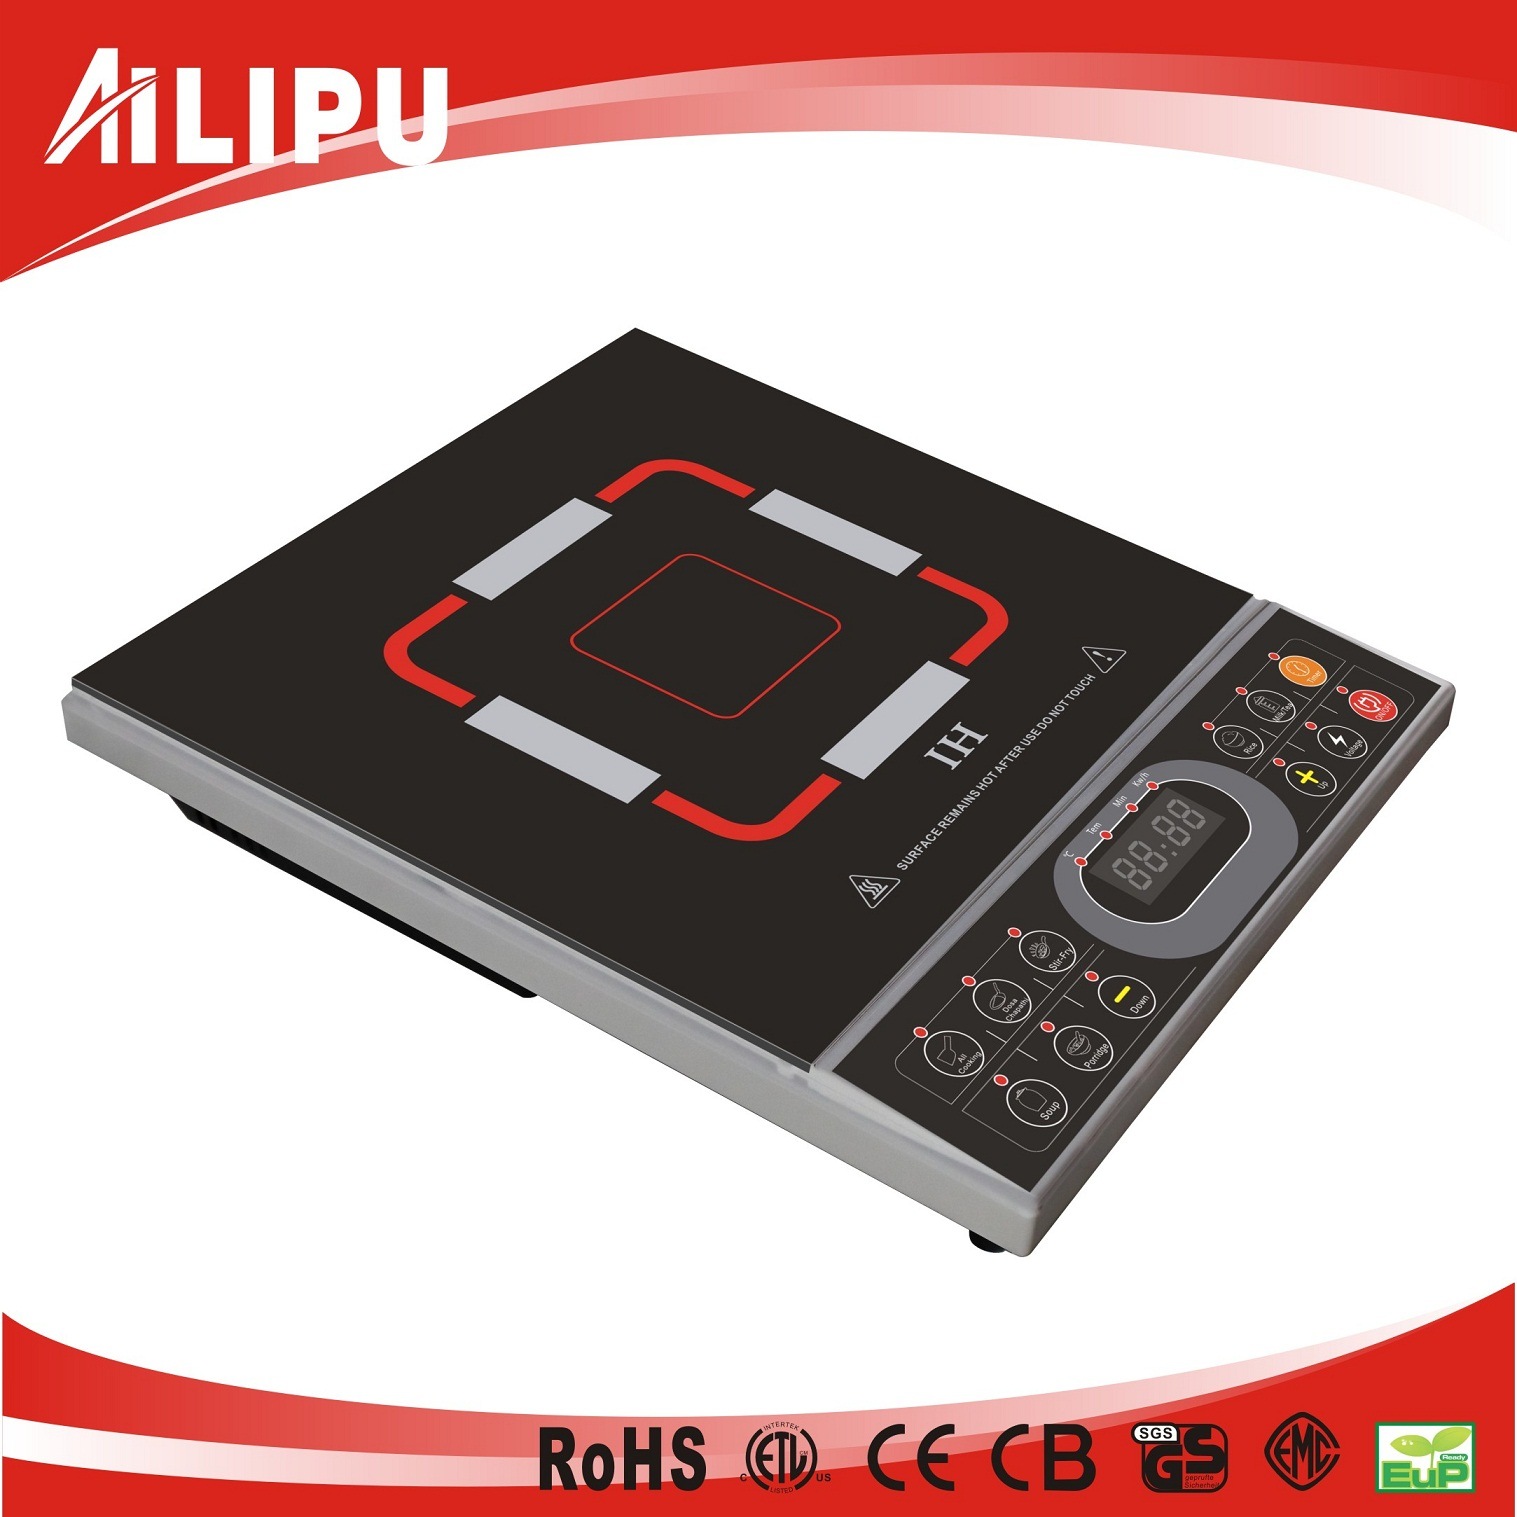 2015 Electric Cooking, Hot Plate From Factory, Home Appliance (SM-A61)